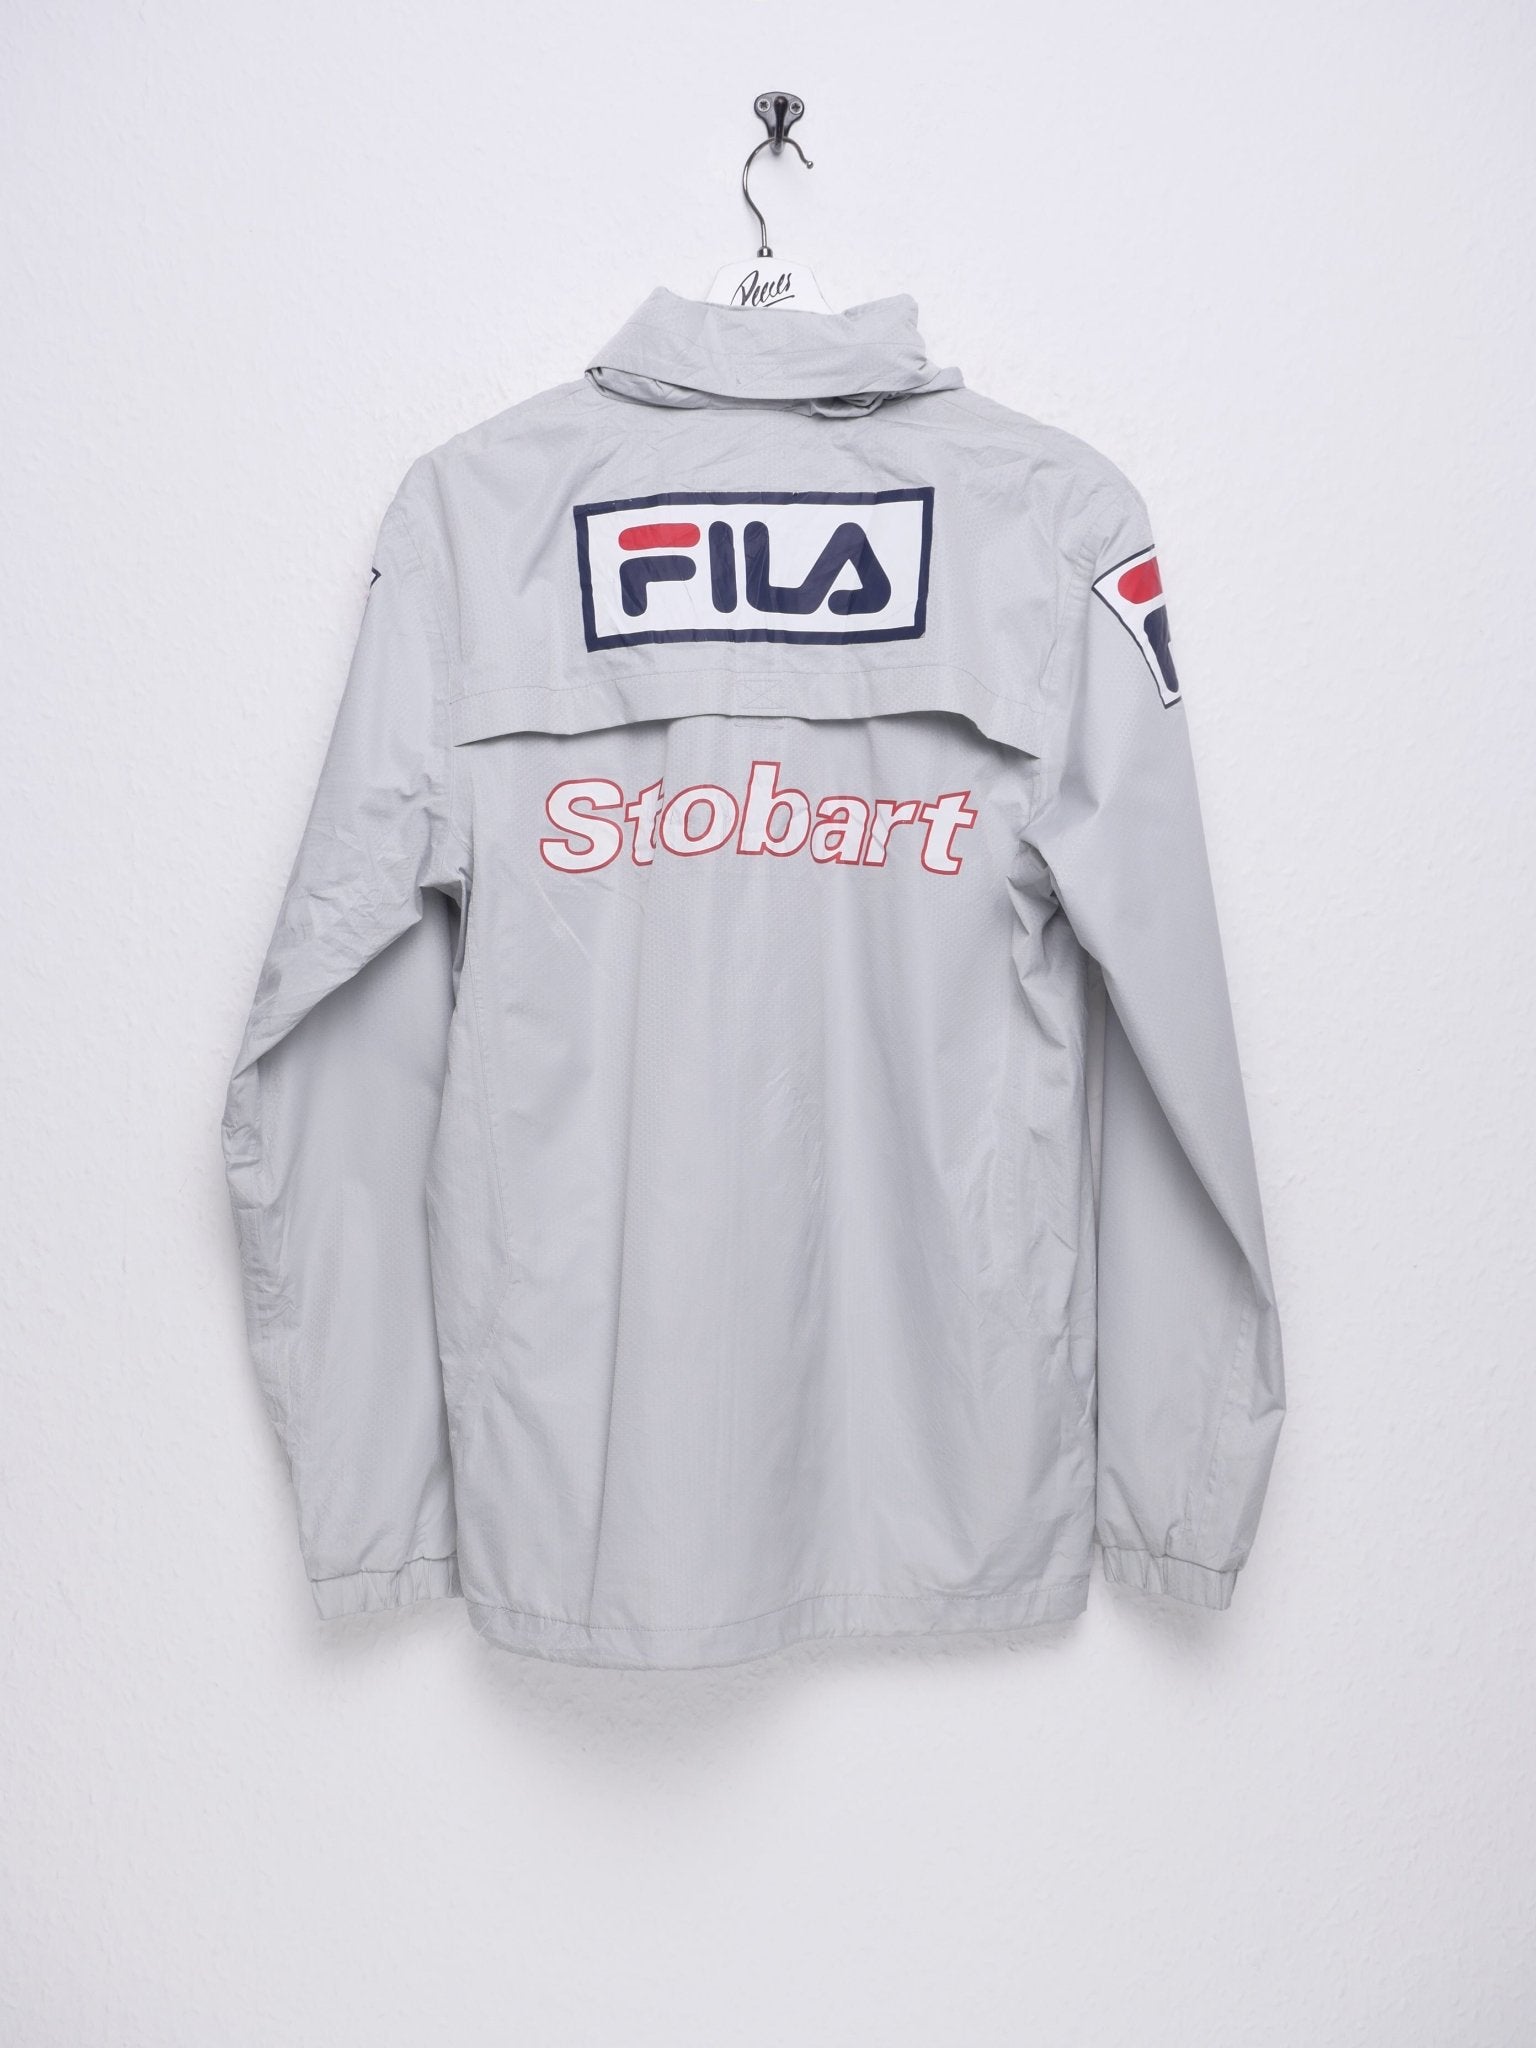 Fila embroidered Spellout grey Track Jacke - Peeces